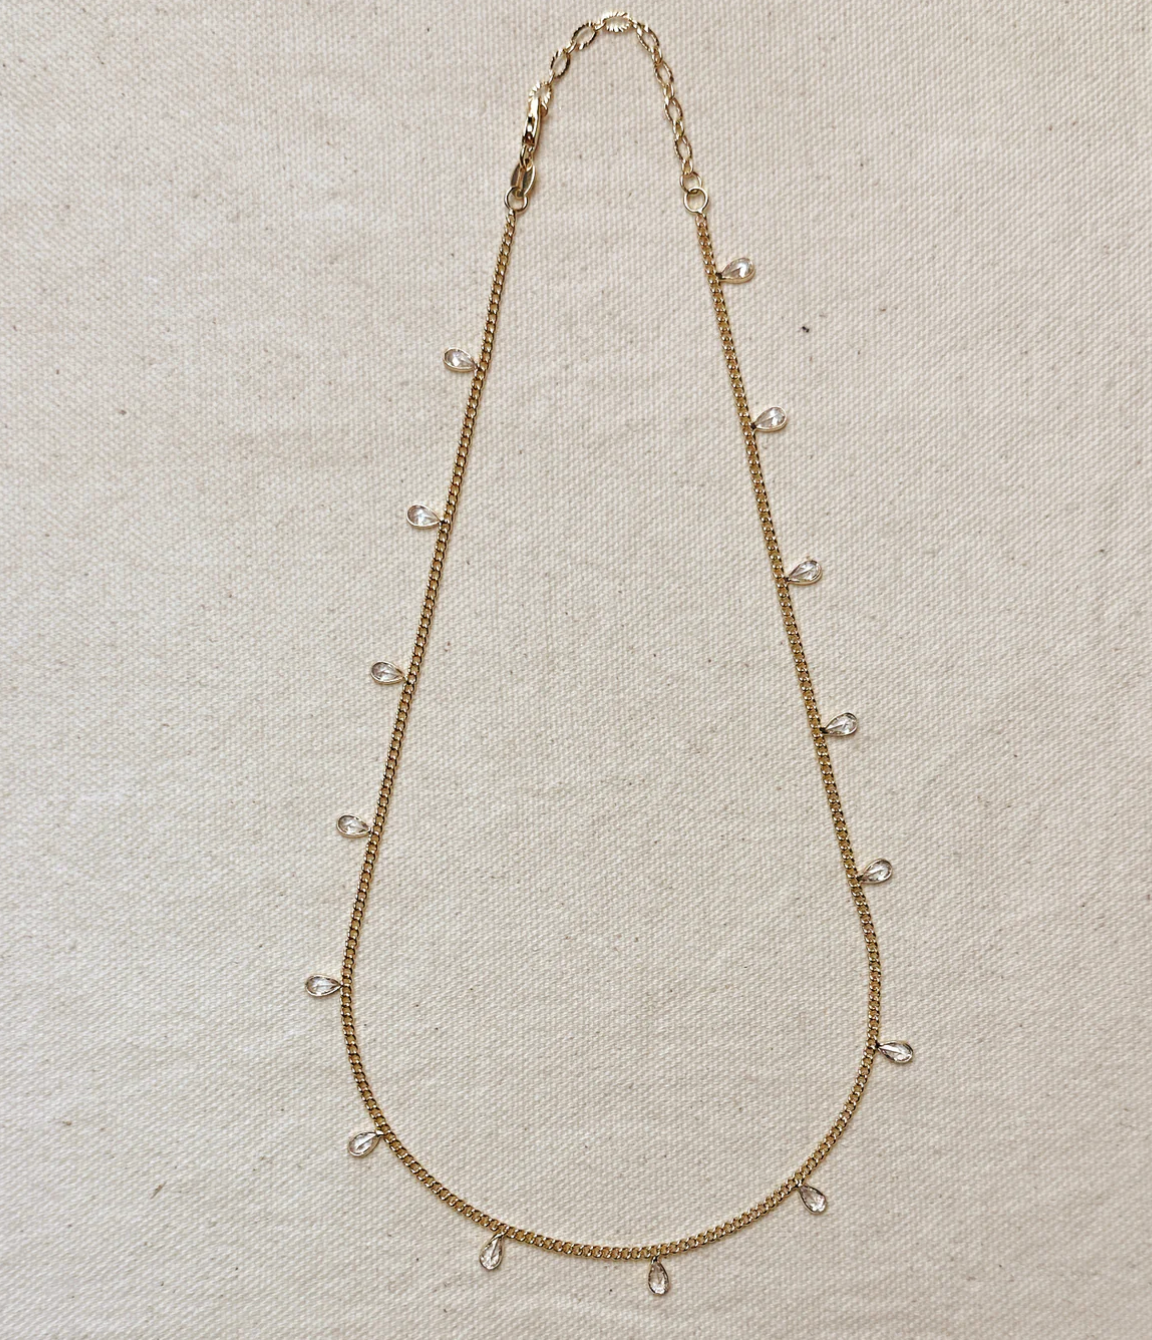 18k Gold Filled 2mm Curb Chain with Bezel Cz Drops Necklace